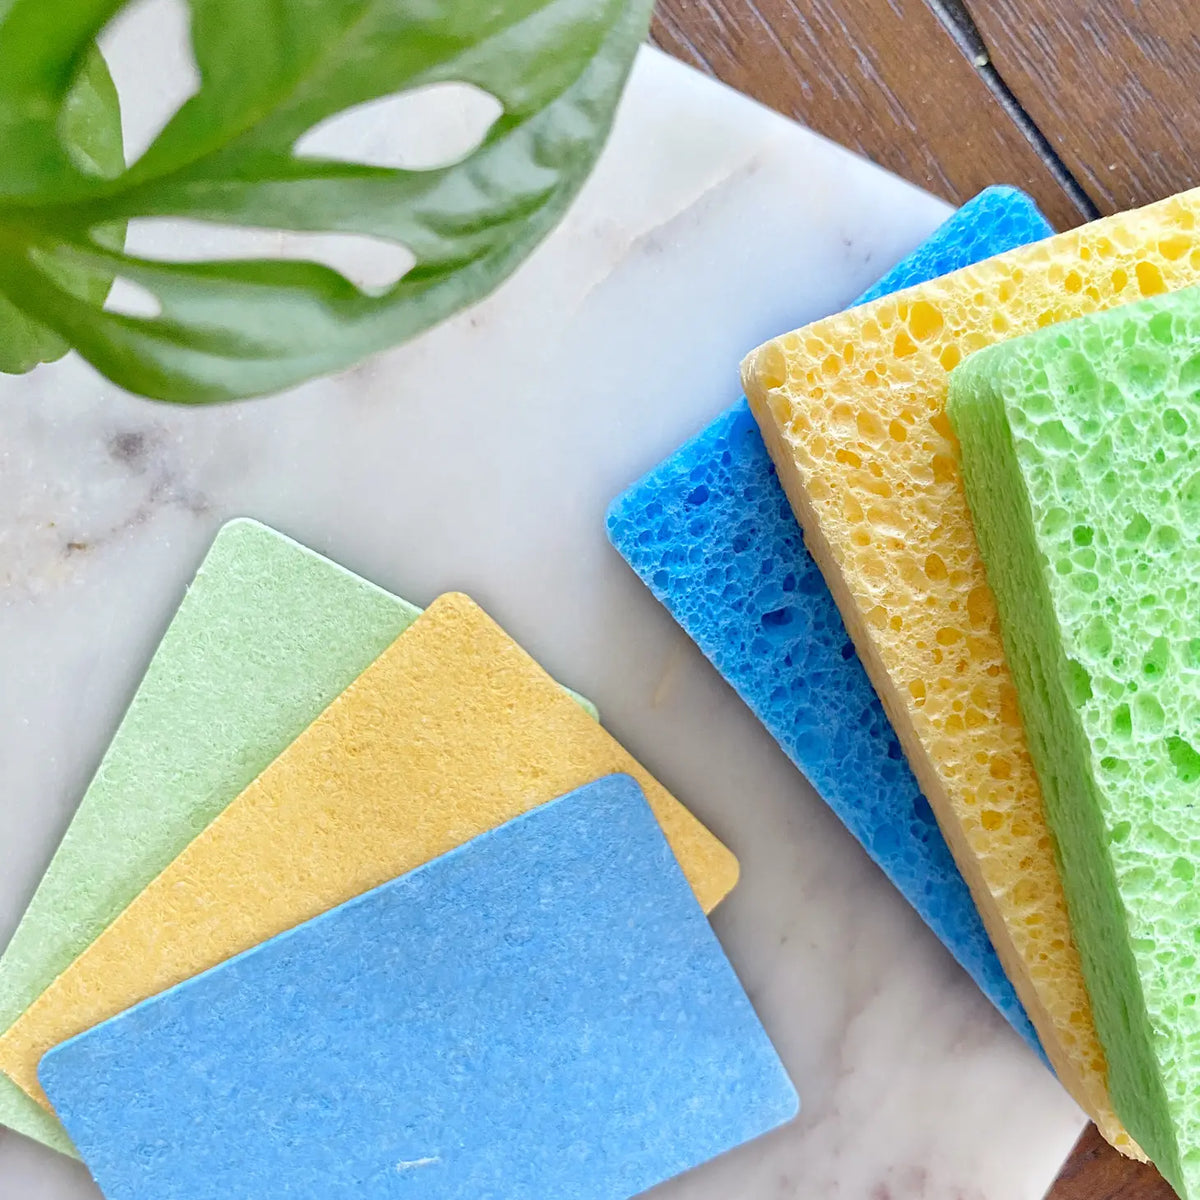 Pop Up Sponges (pack of 3) – The Green Tap